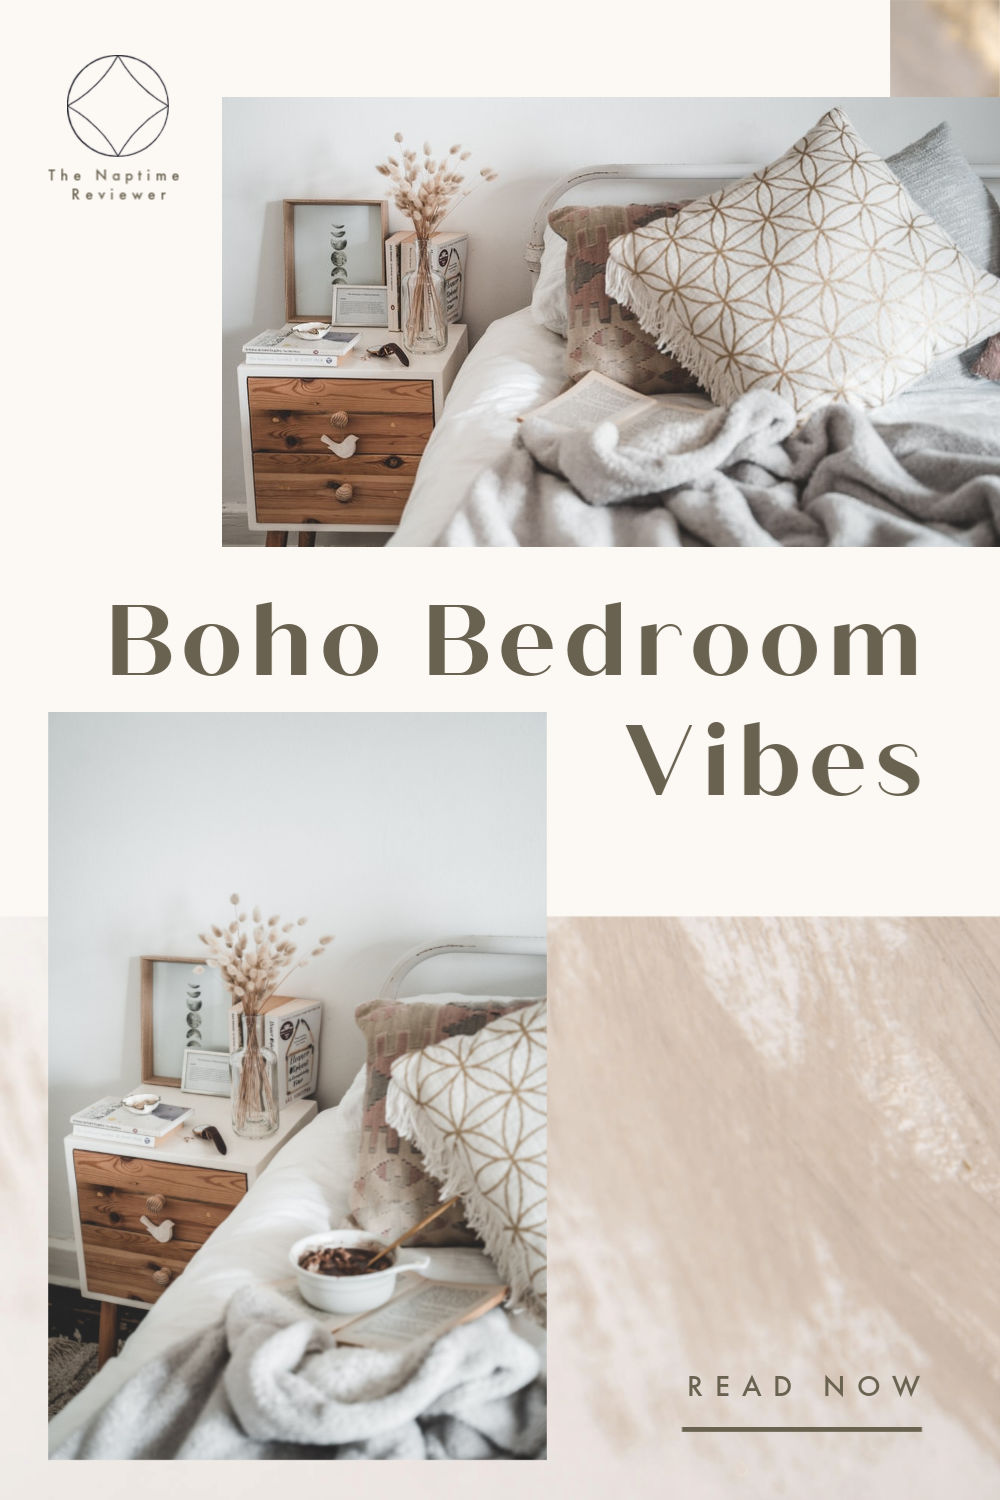 Boho bedroom vibes with vintage pillows